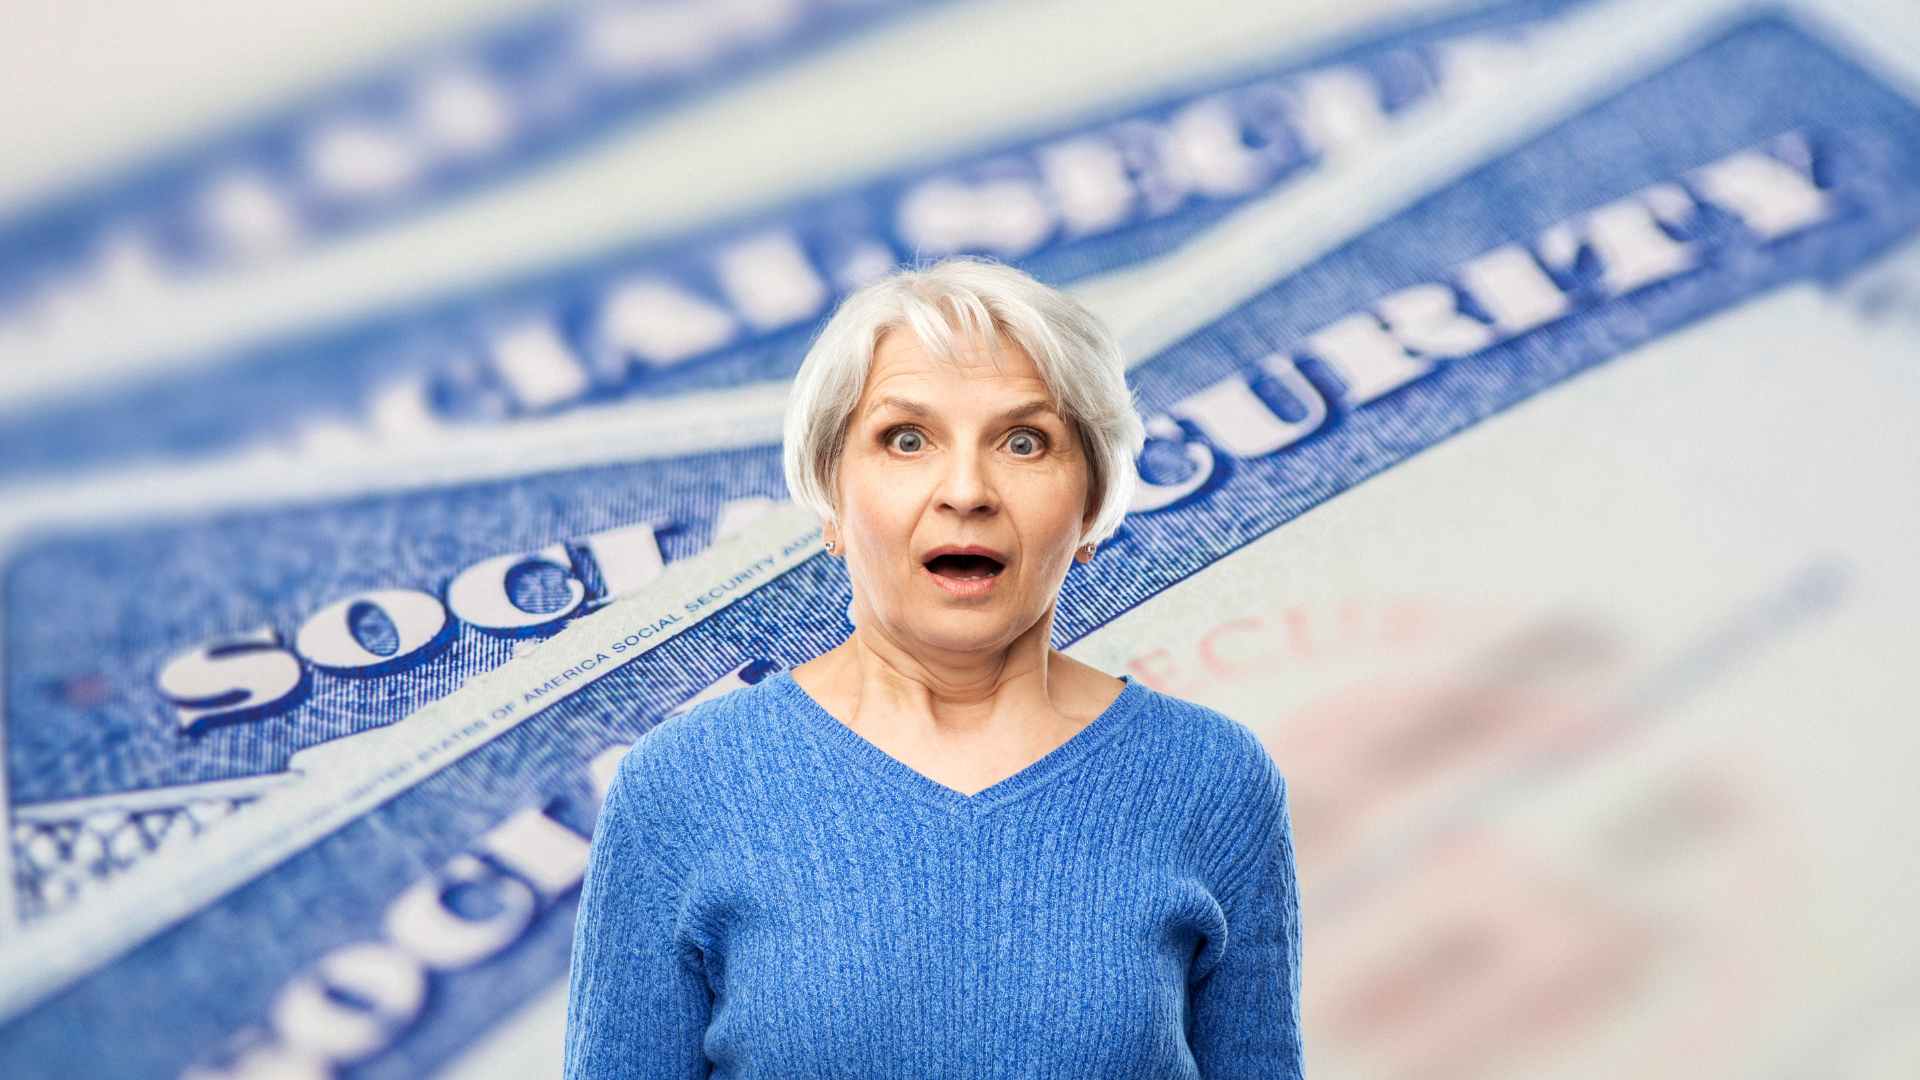 Senior and SSA cards for Social Security and overpayments are causing distress among those on SSDI, SSI or even retirement benefits